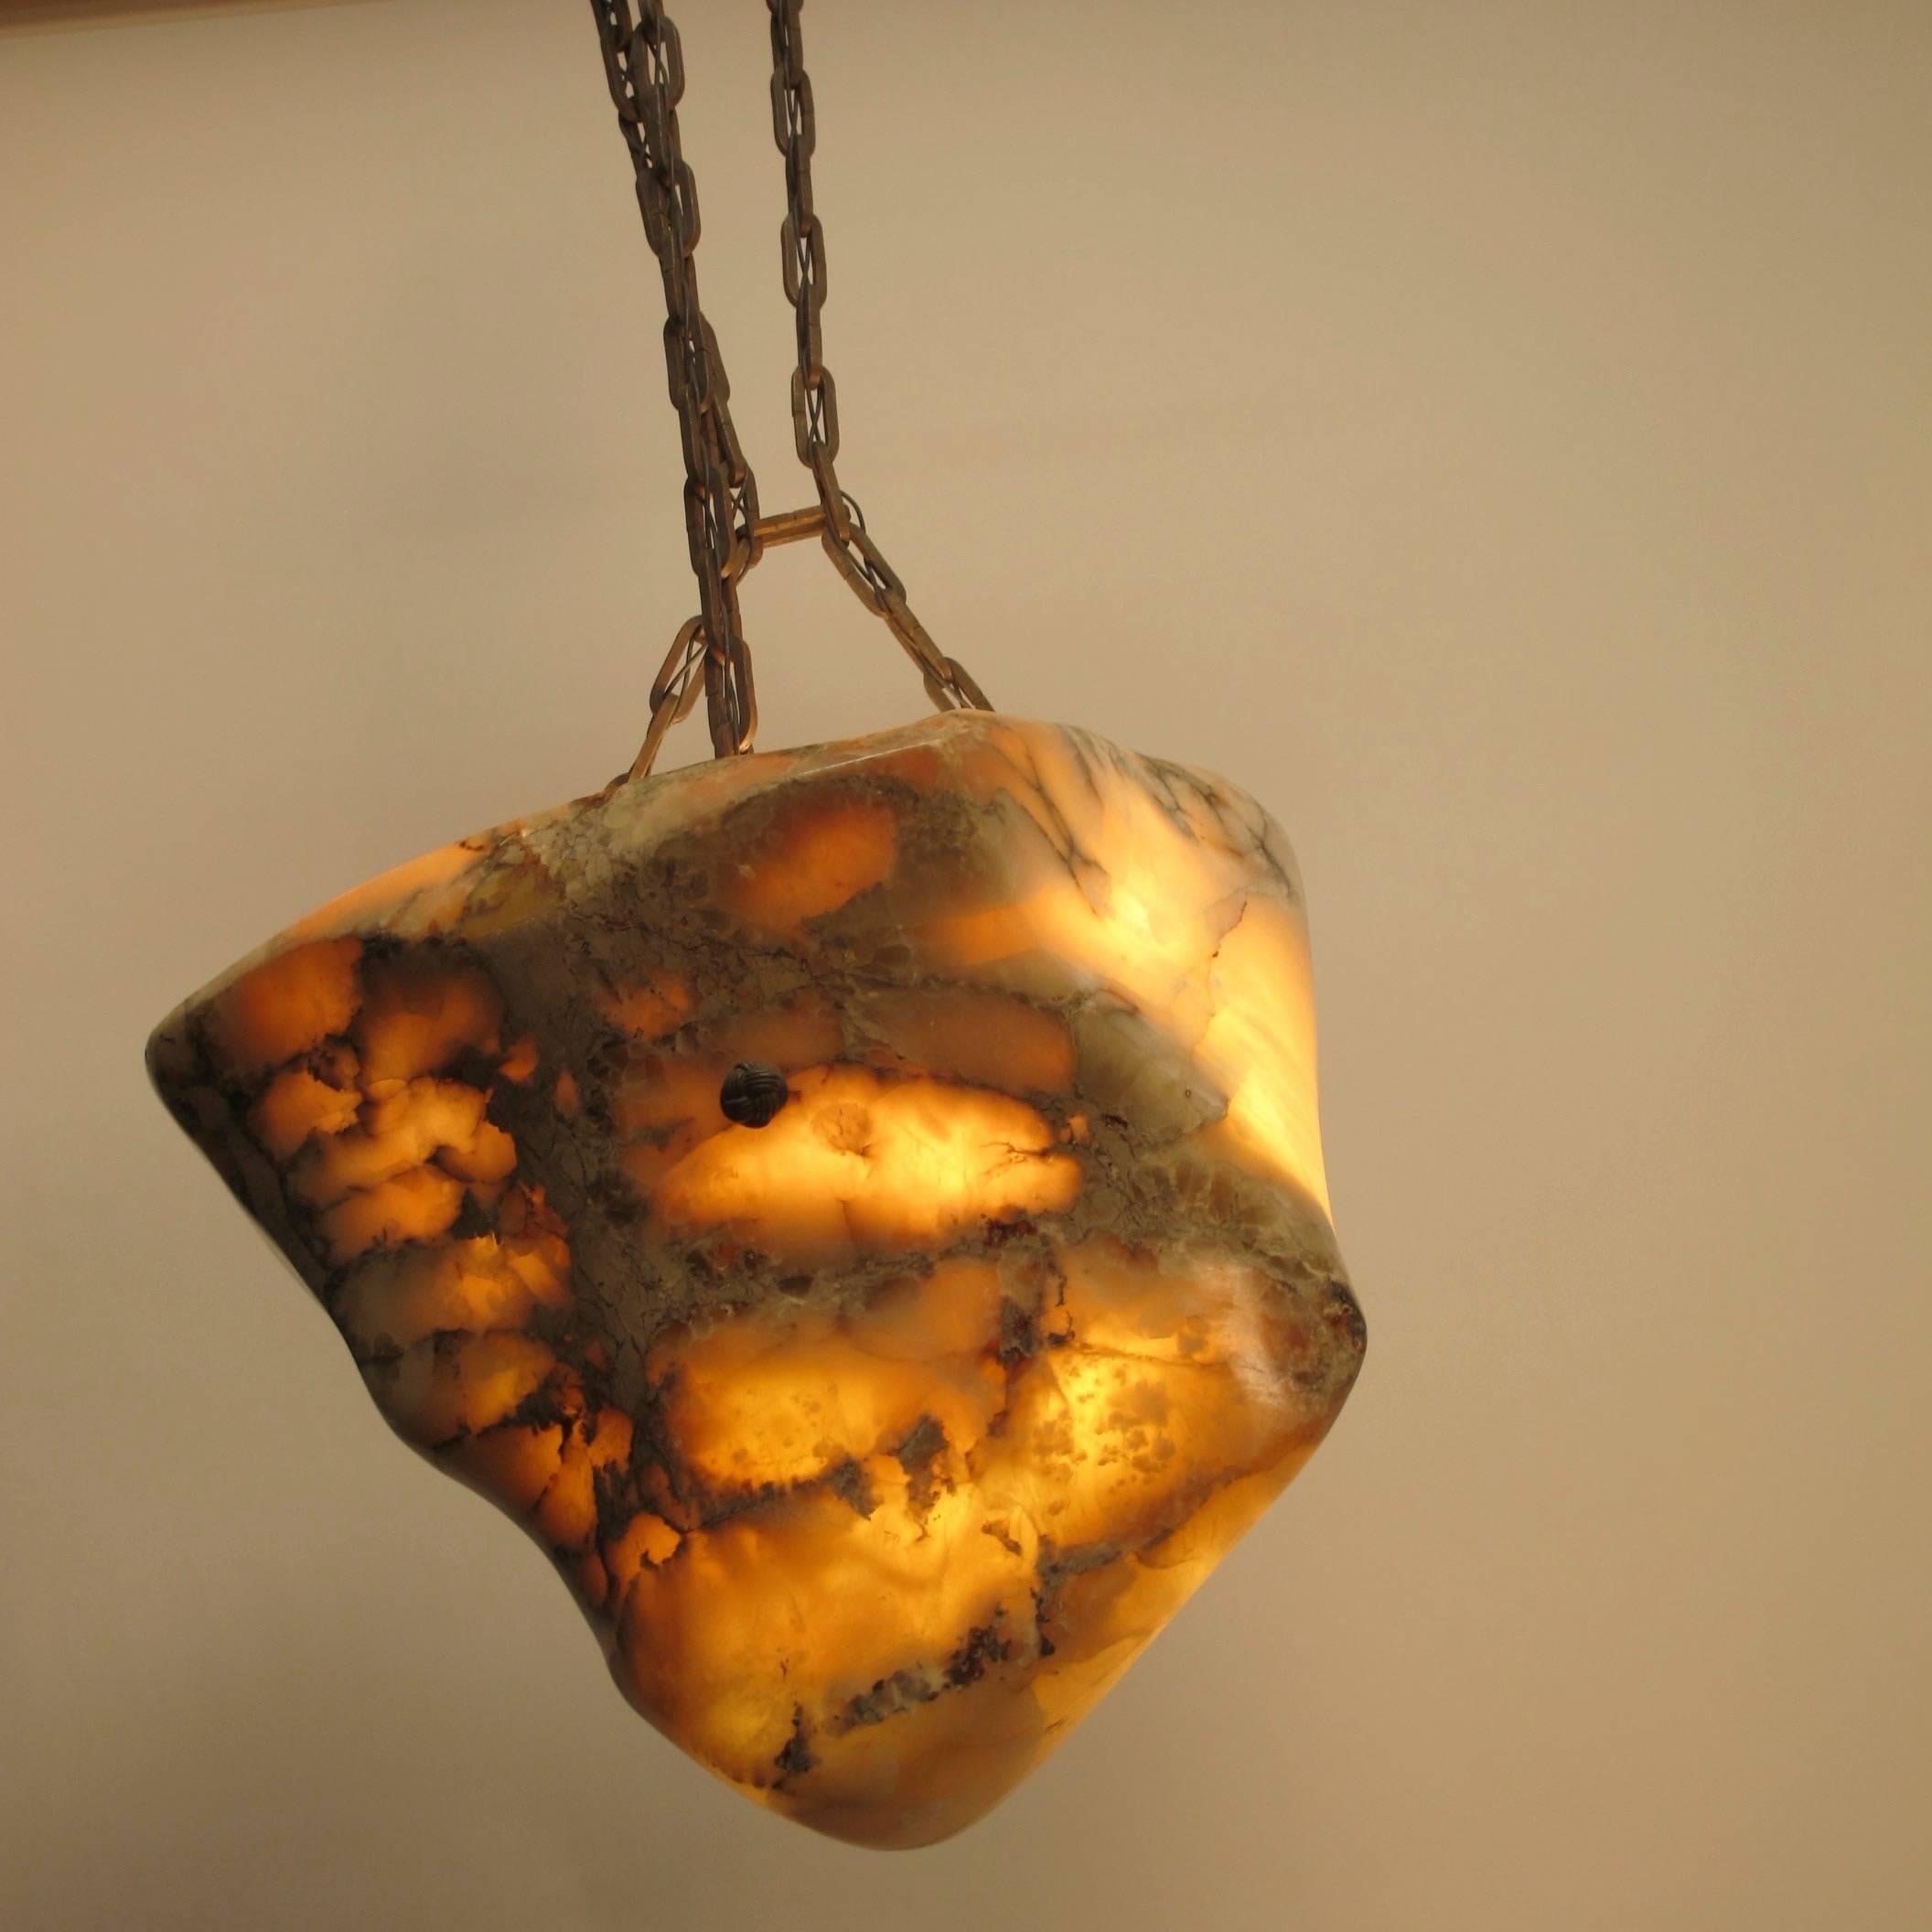 Alabaster Light Fixture with Antique Bronze Hardware In Excellent Condition For Sale In San Francisco, CA